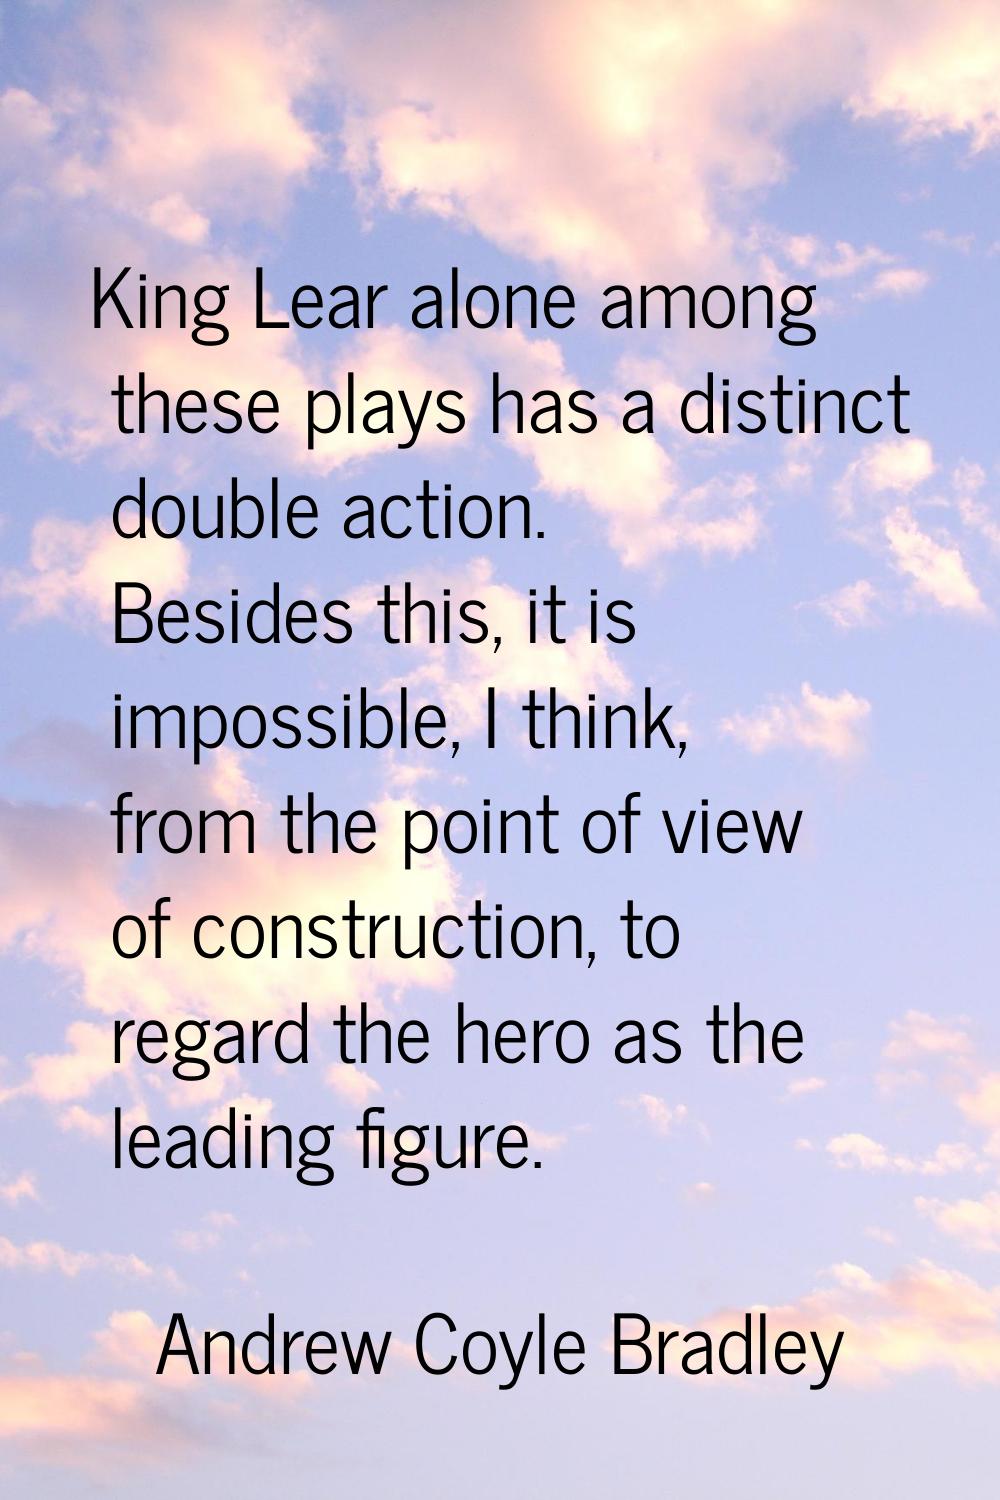 King Lear alone among these plays has a distinct double action. Besides this, it is impossible, I t